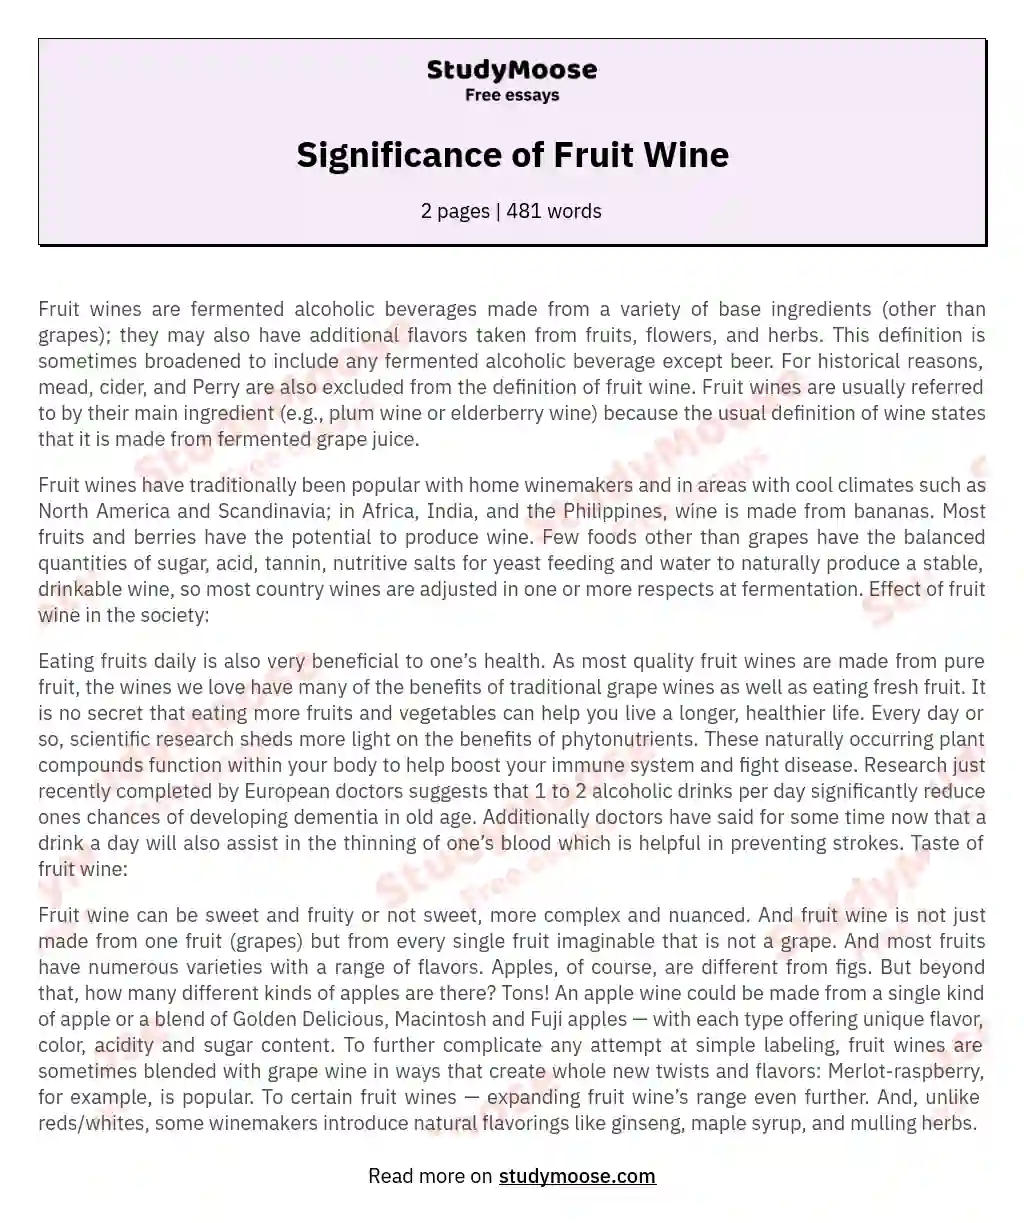 Significance of Fruit Wine essay